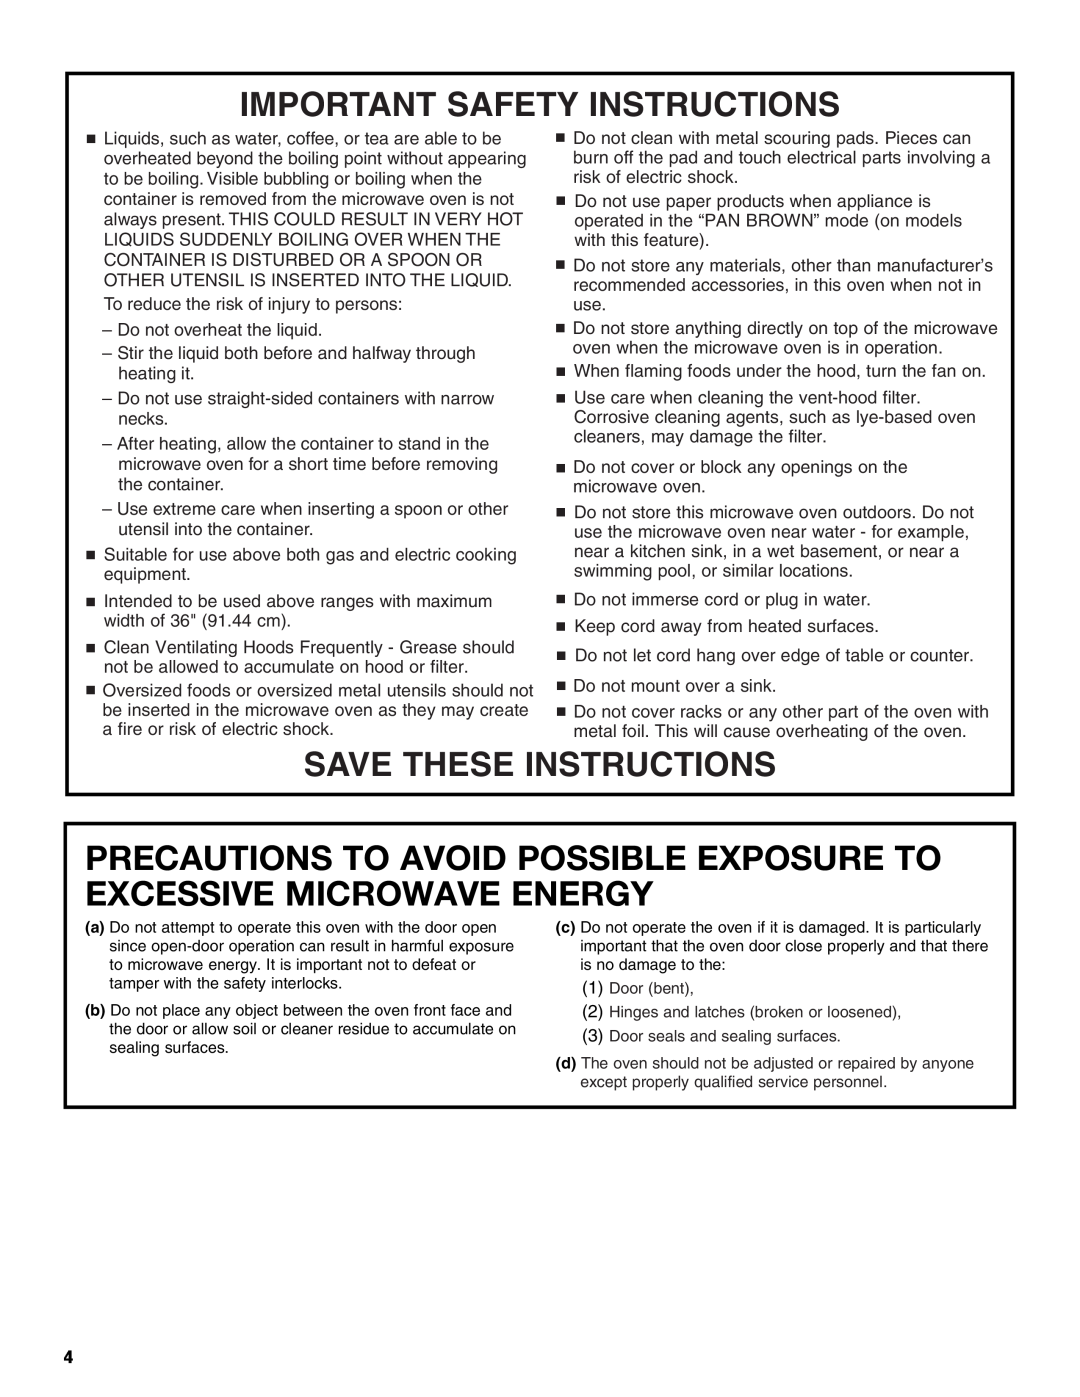 Whirlpool GH7208XR Precautions To Avoid Possible Exposure To Excessive Microwave Energy, Important Safety Instructions 